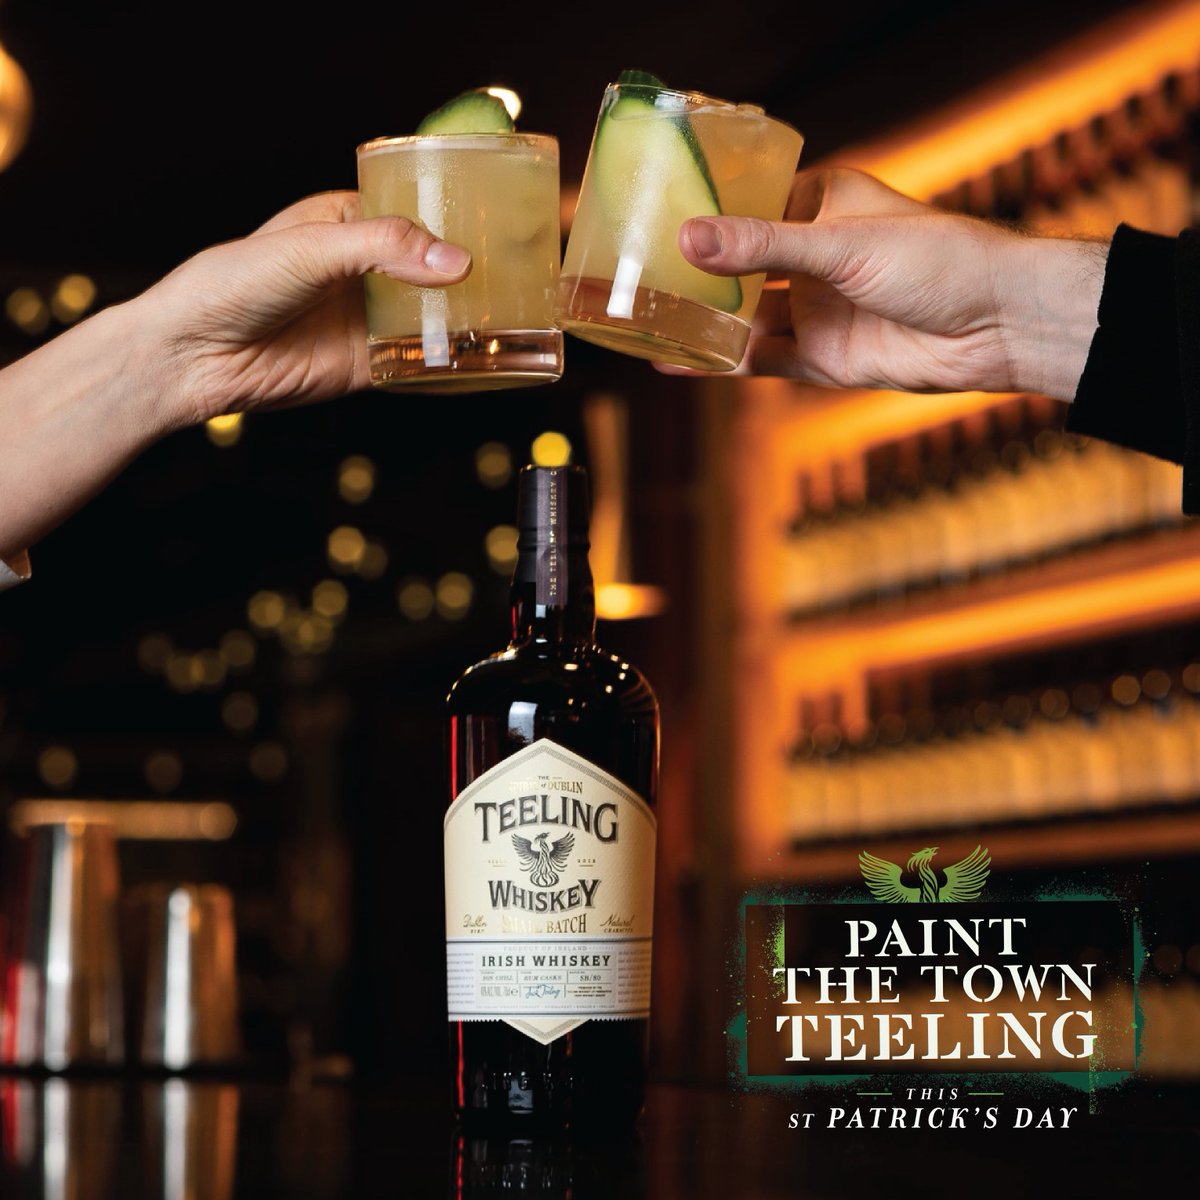 The only (Liquid) Gold you’ll need this St. Patrick’s Day to Paint the Town Teeling! Have you got your bottle of Teeling Small Batch at the ready? #TeelingWhiskey #PaintTheTownTeeling #StPatricksDay #SmallBatch